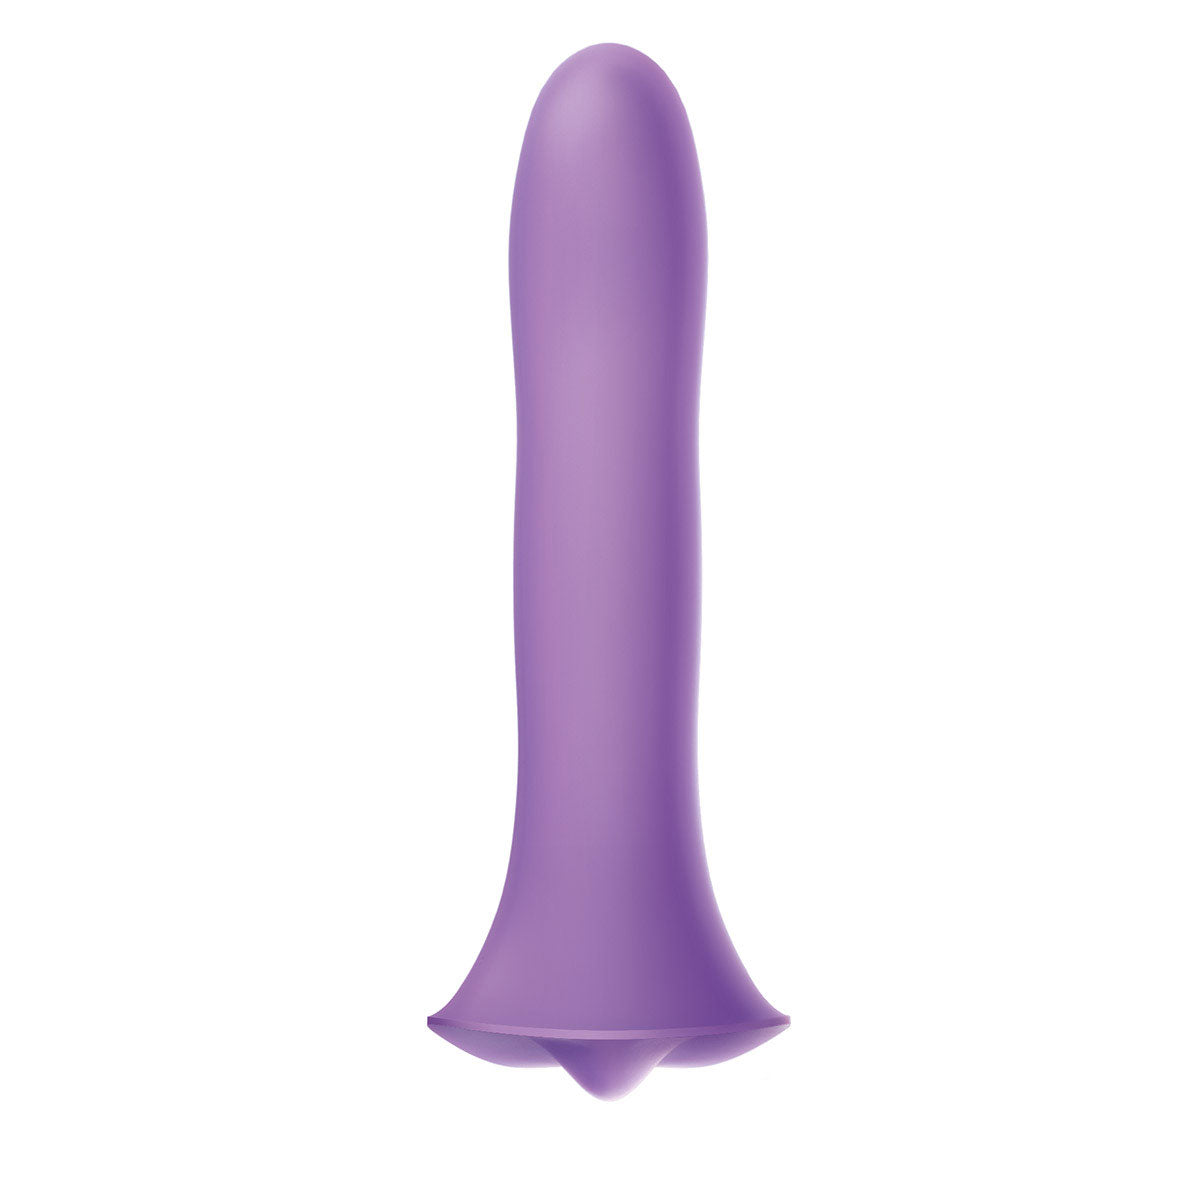 Wet for Her Fusion Dil - Large - Assorted Colors